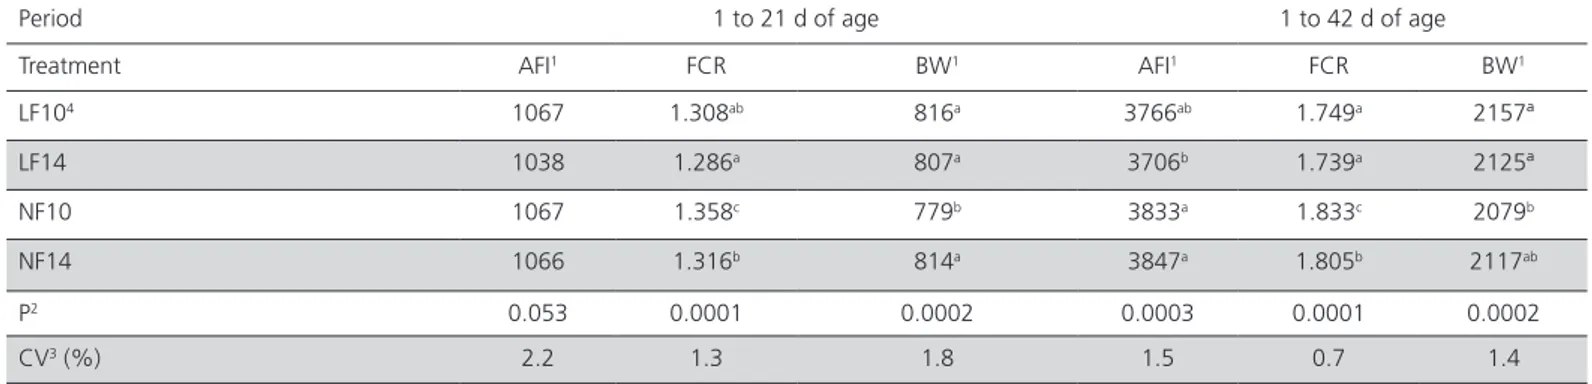 Table 6 – Average feed intake (AFI), feed conversion ratio (FCR), and body weight (BW) of female broilers housed at two  different densities from 1 to 21 d and from 1to 42 d of age, and fed linear(LF) or nonlinear formulation (NF) diets